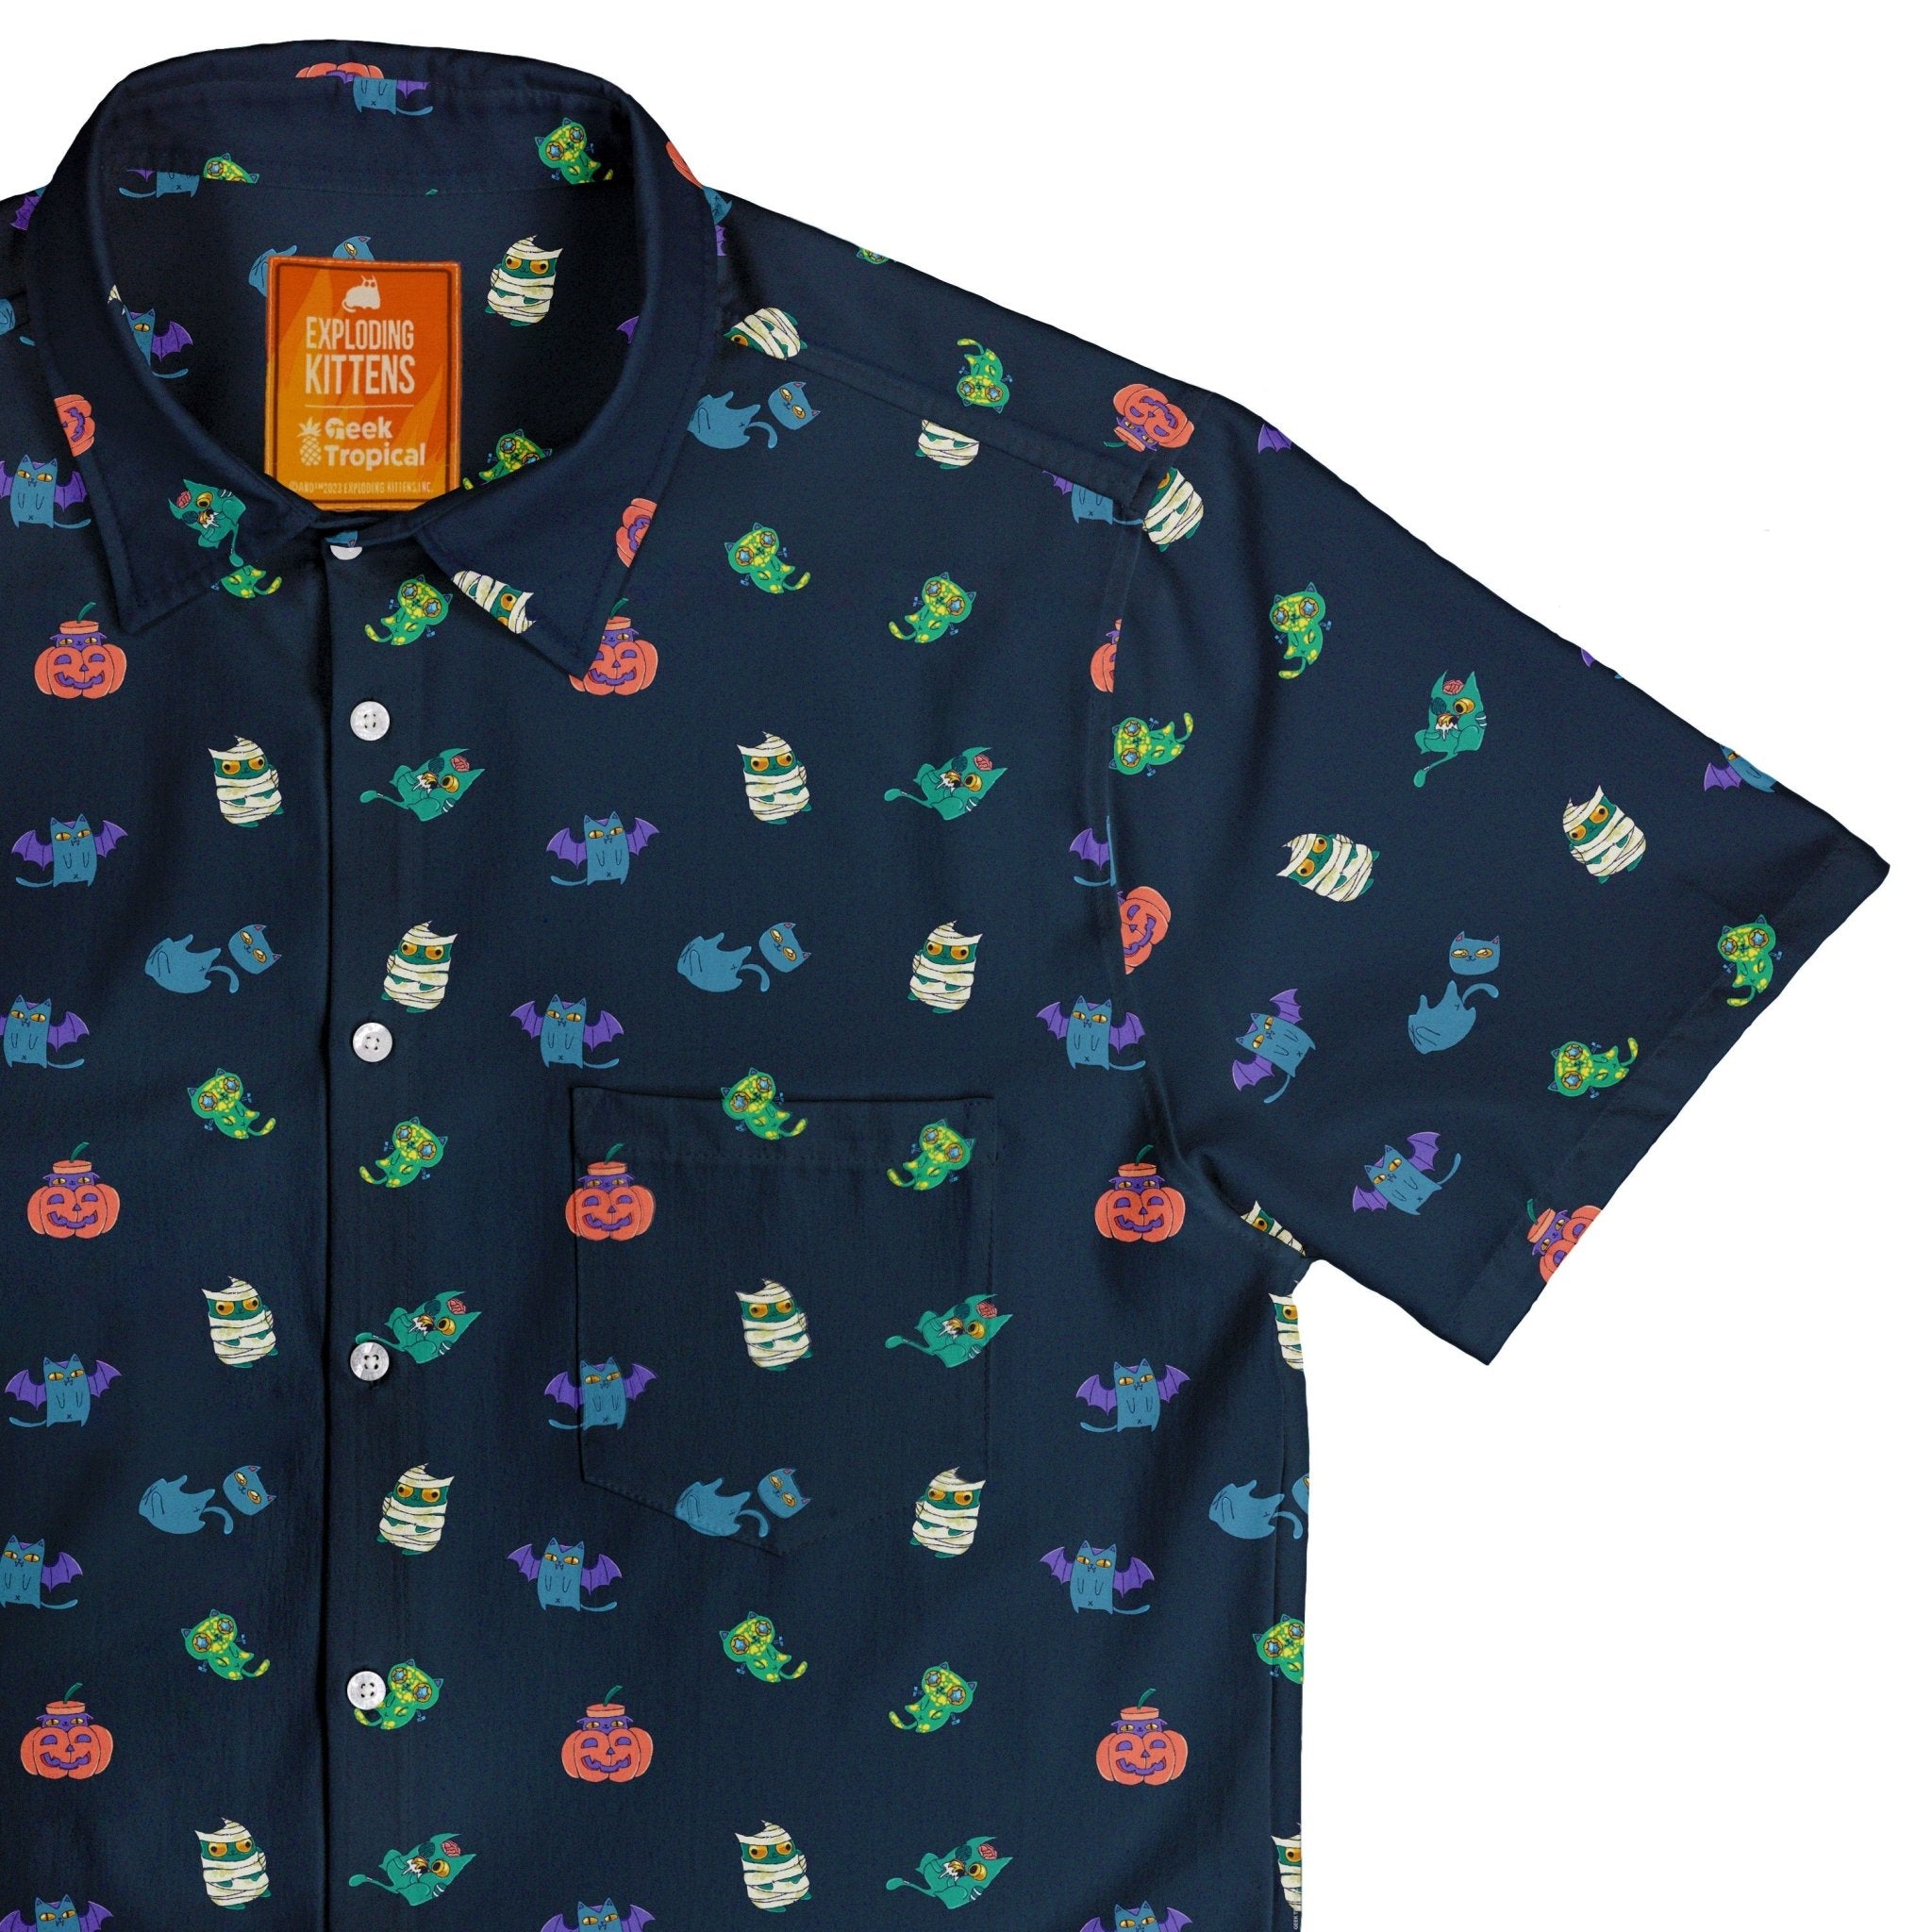 Spooky Exploding Kittens Button Up Shirt - adult sizing - Animal Patterns - board game print